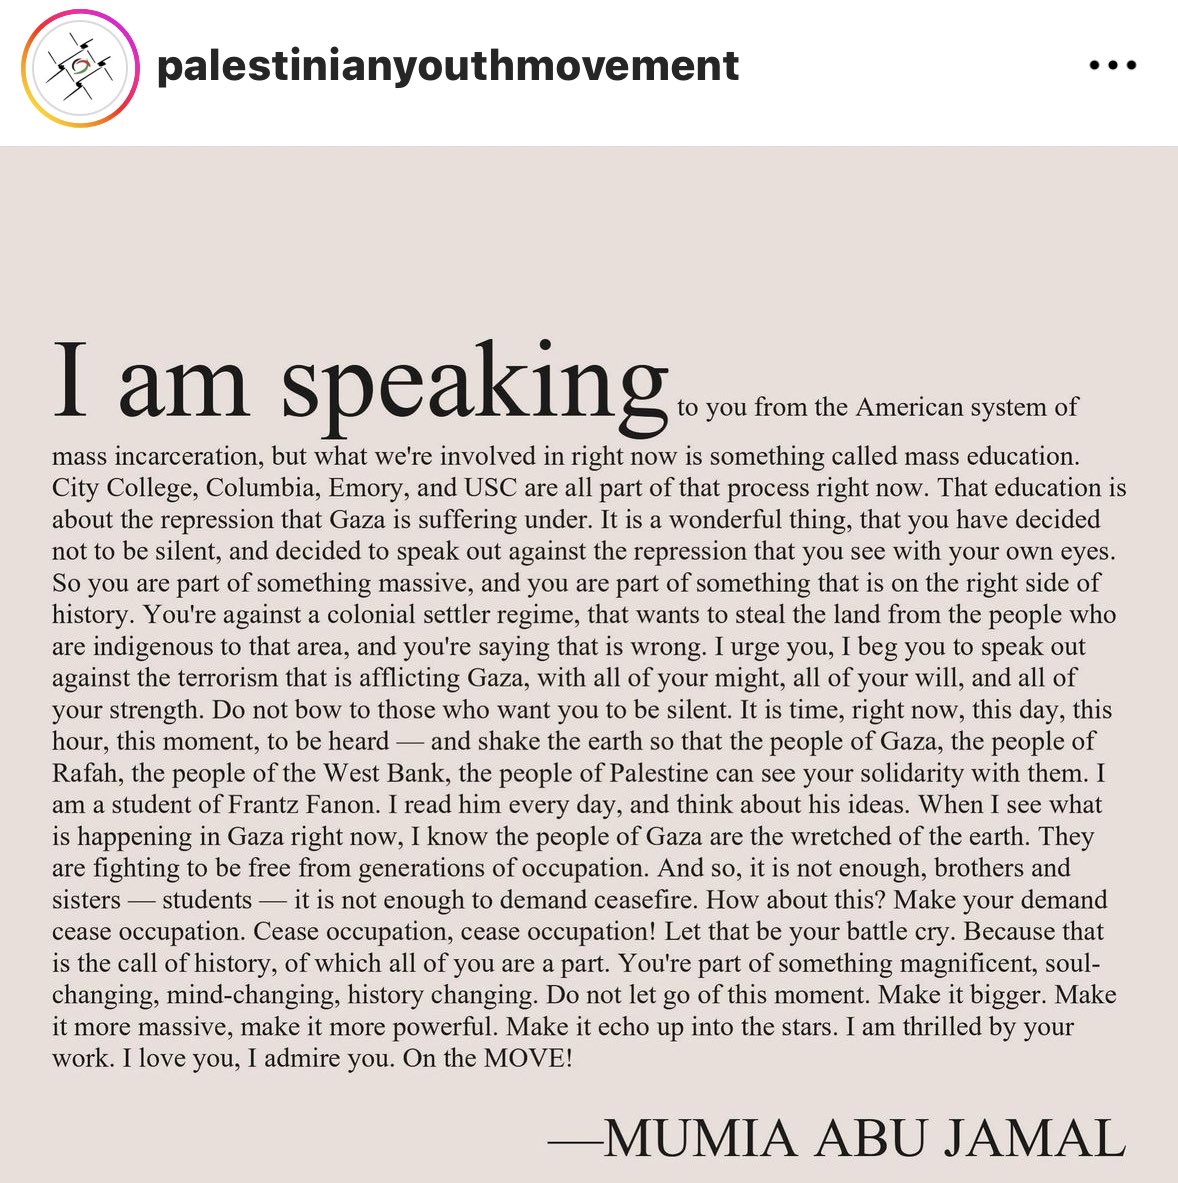 The Palestinian Youth Movement, a leader in the orchestration of protests in Canada, posts an inspiring note from the notorious former Black Panther member Mumia Abu-Jamal, who was convicted of the 1981 murder of Philadelphia police officer Daniel Faulkner and sentenced to life.